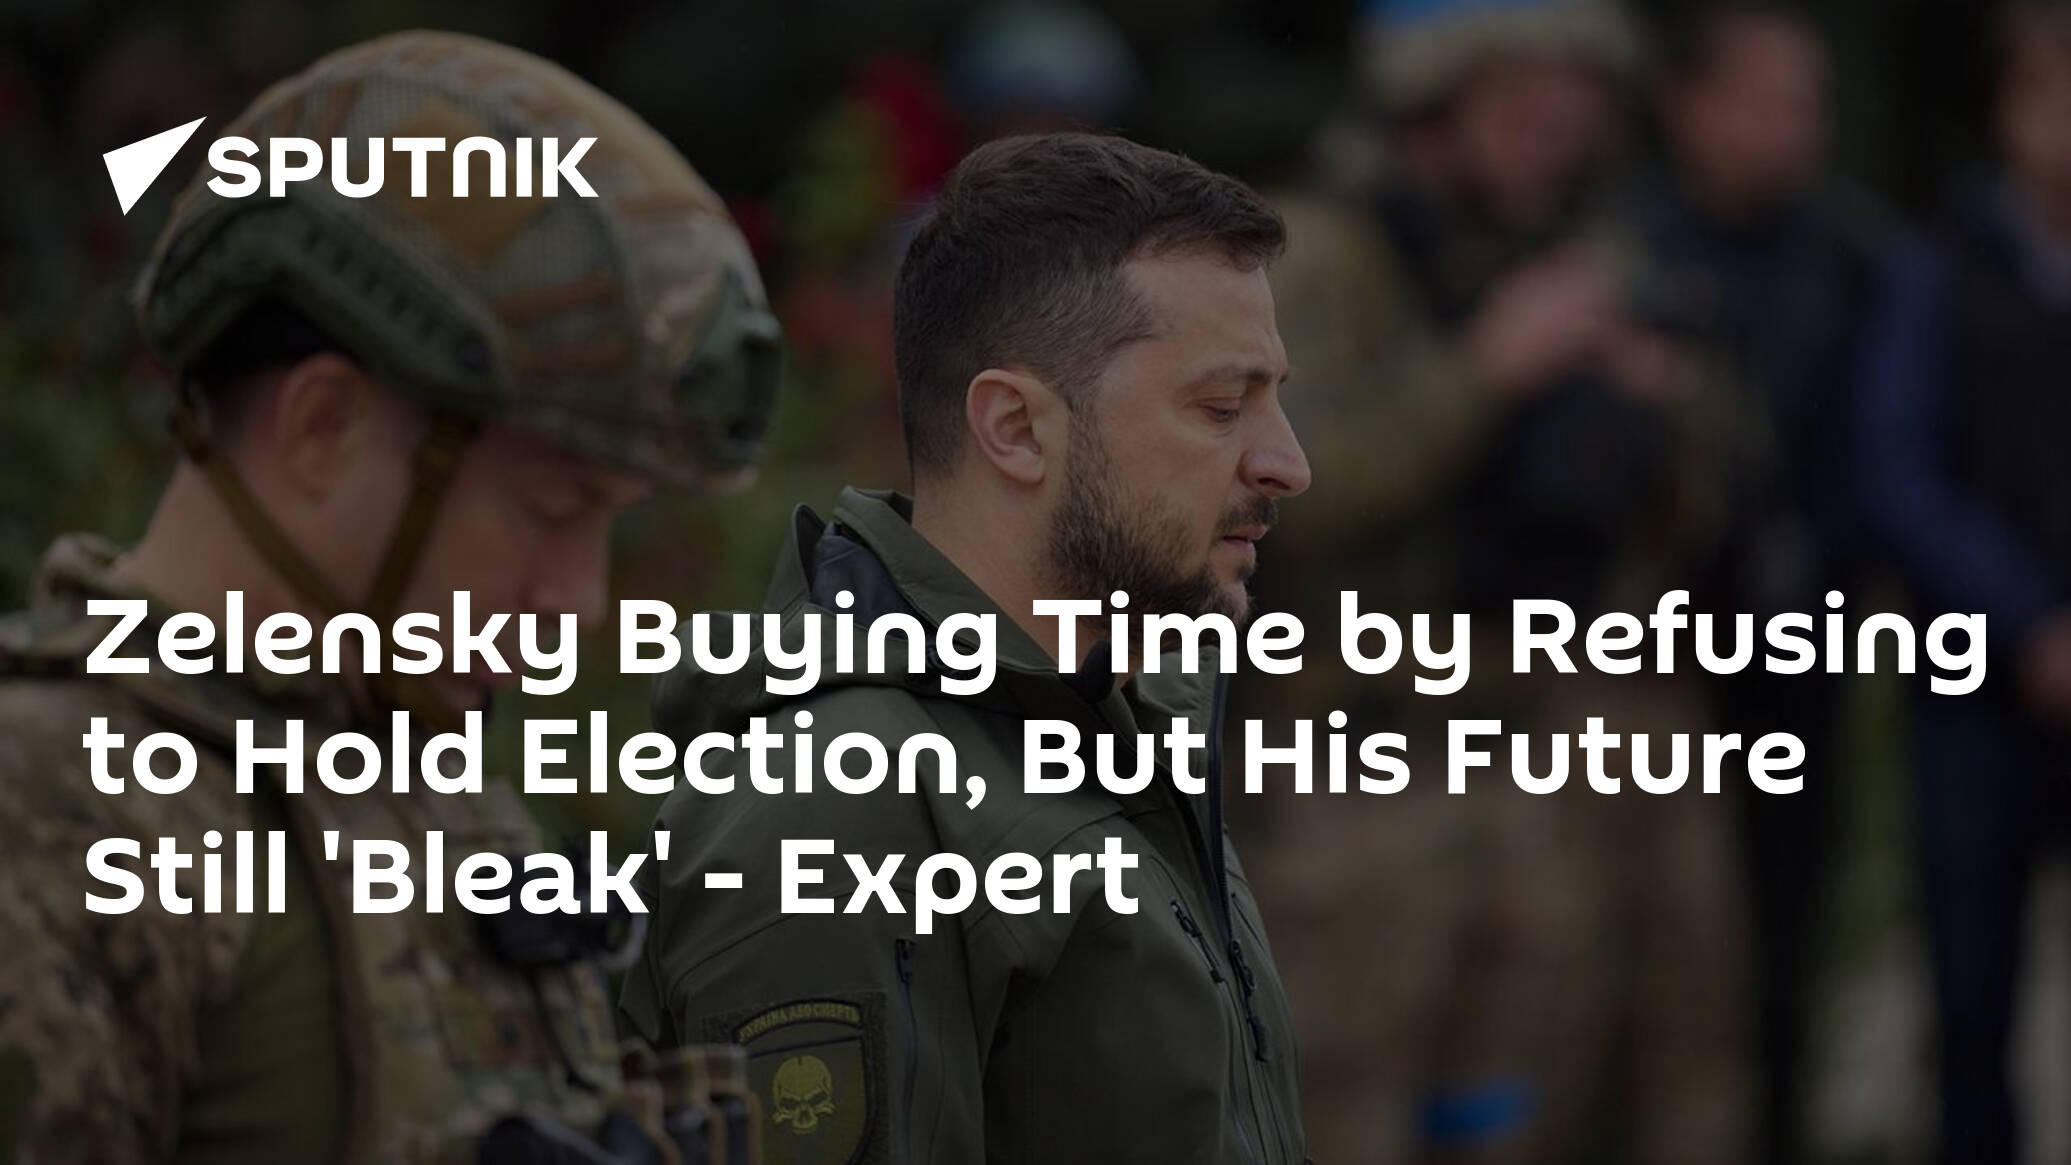 Zelensky Buying Time by Refusing to Hold Election, But His Future Still 'Bleak' – Expert